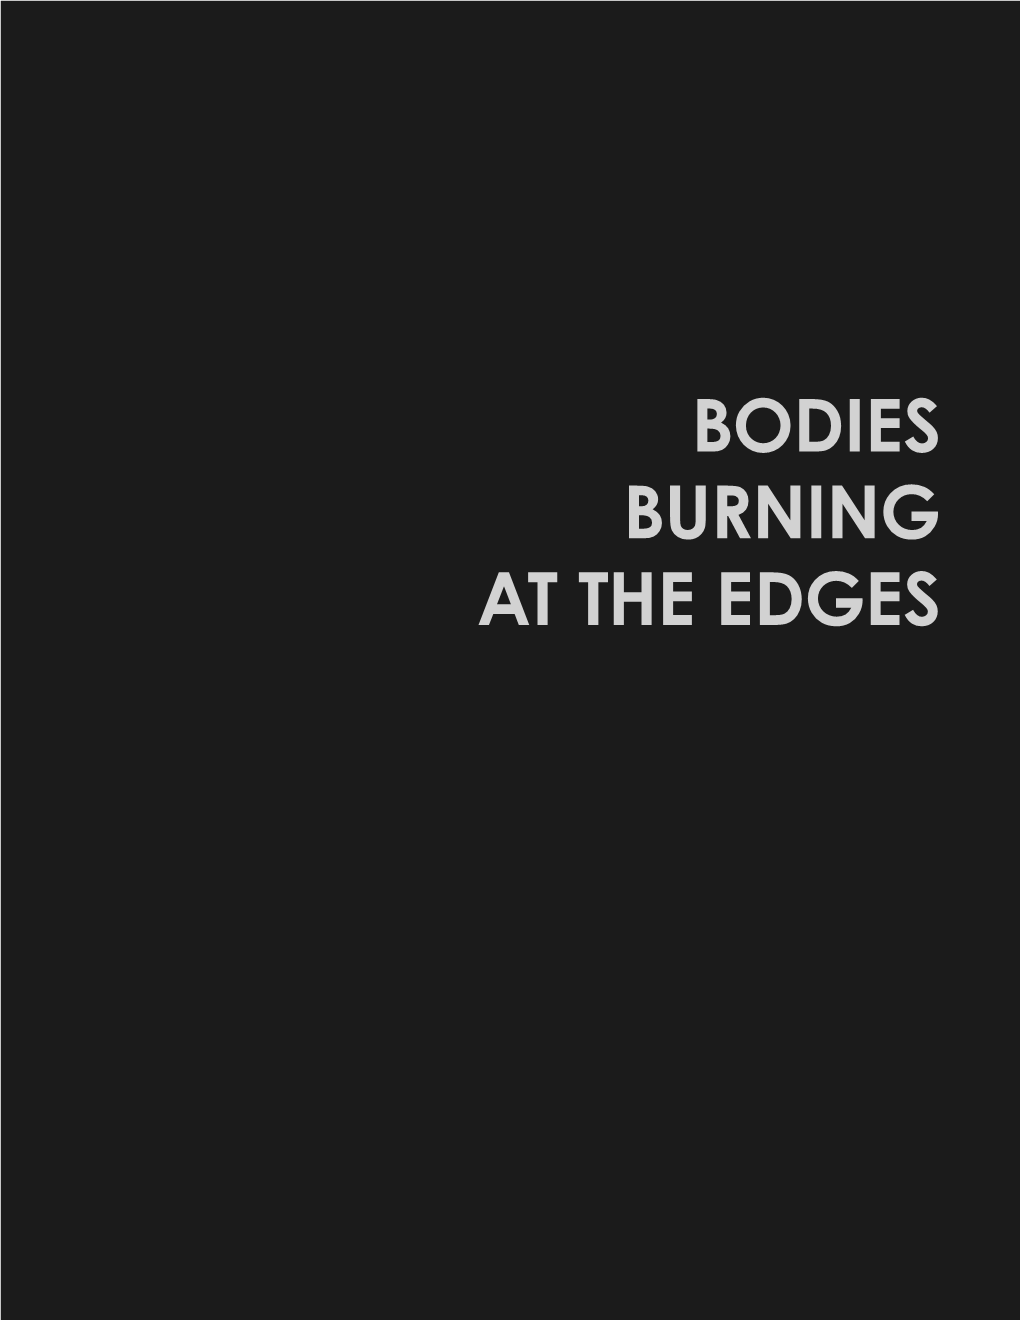 Bodies Burning at the Edges